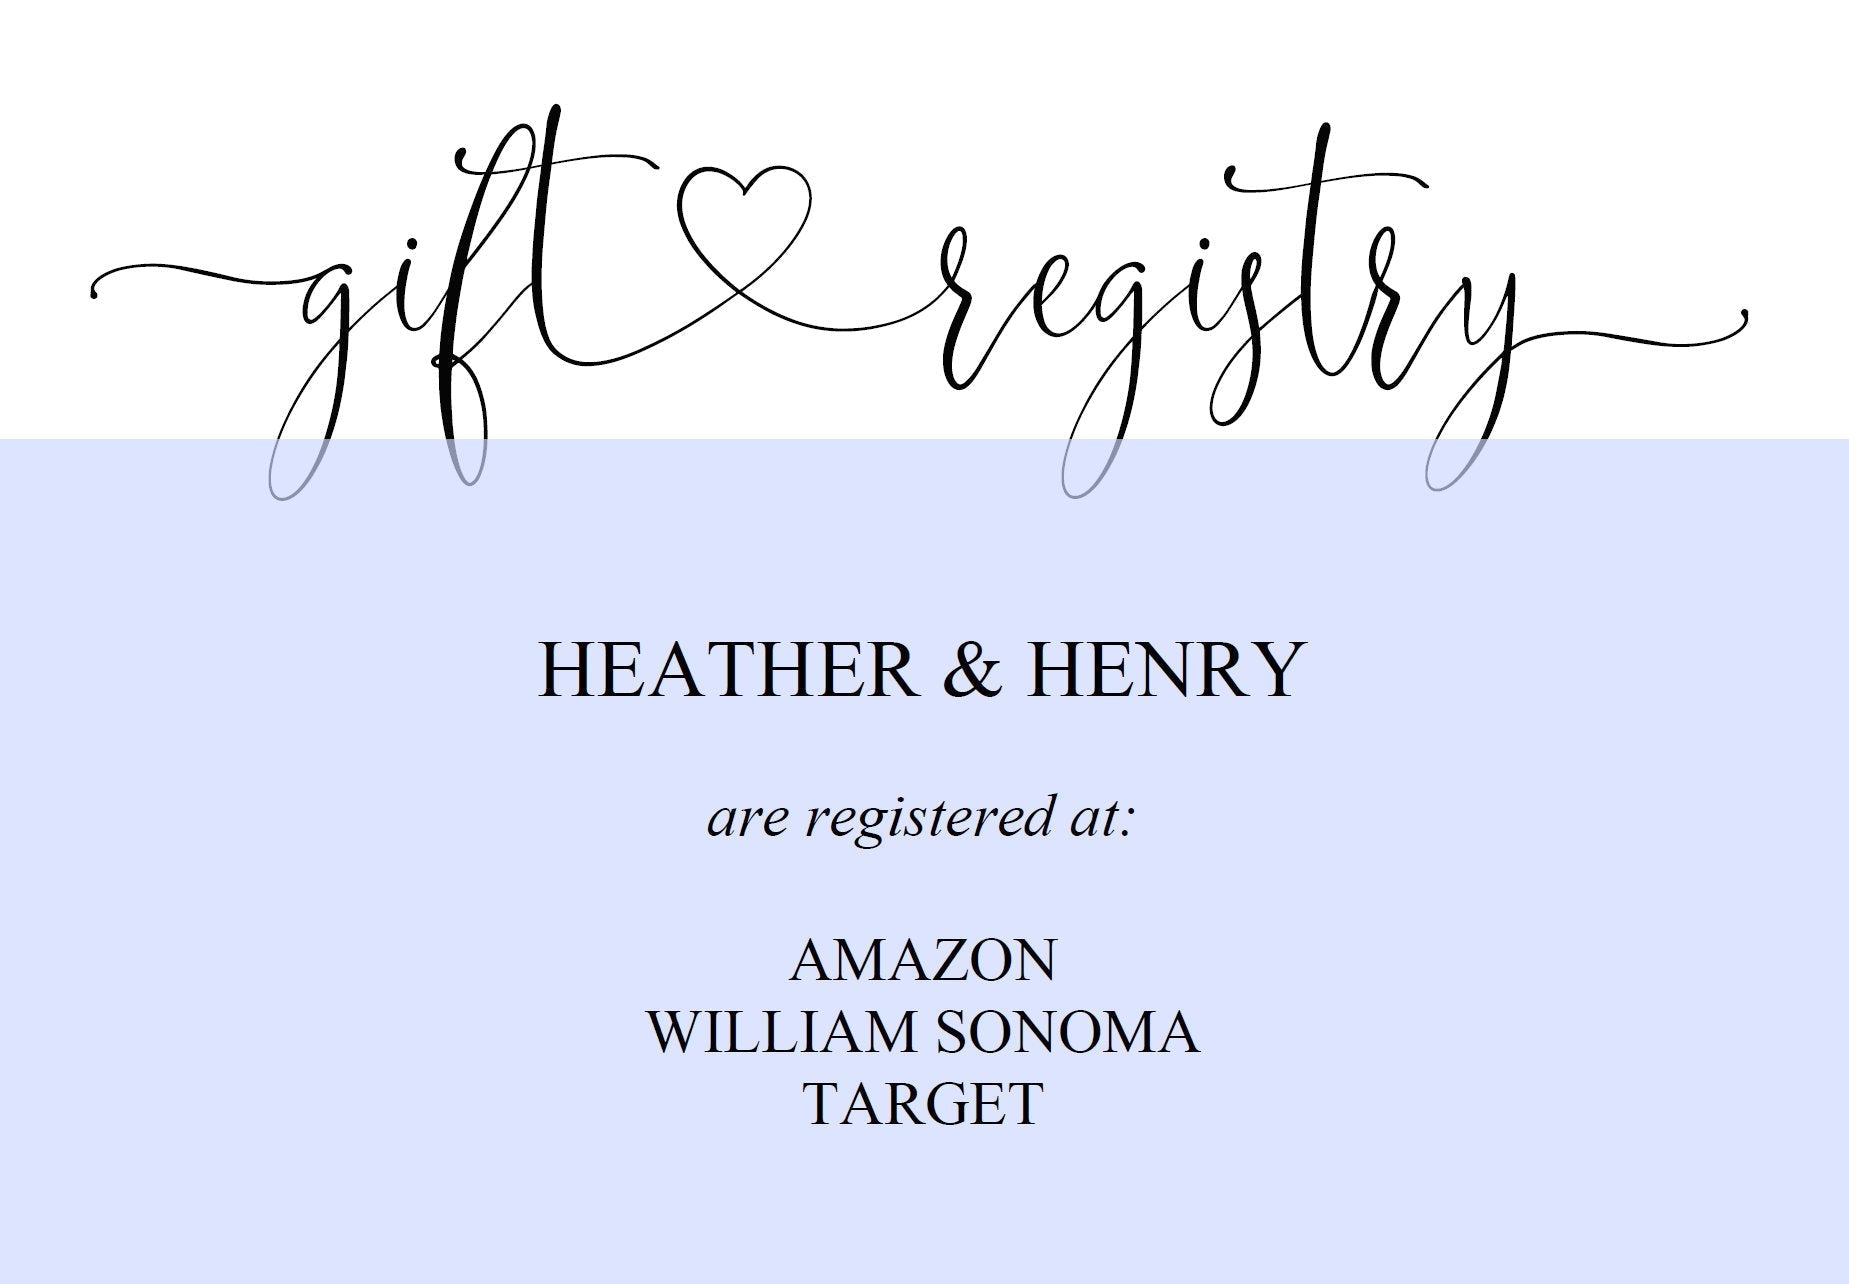 Registry Card Template, Gift Registry, Wedding Template, Enclosure Cards, Registry Wedding, Shower Registry, Registry Card Insert  - Heather TAGS | TY | INSERTS SAVVY PAPER CO